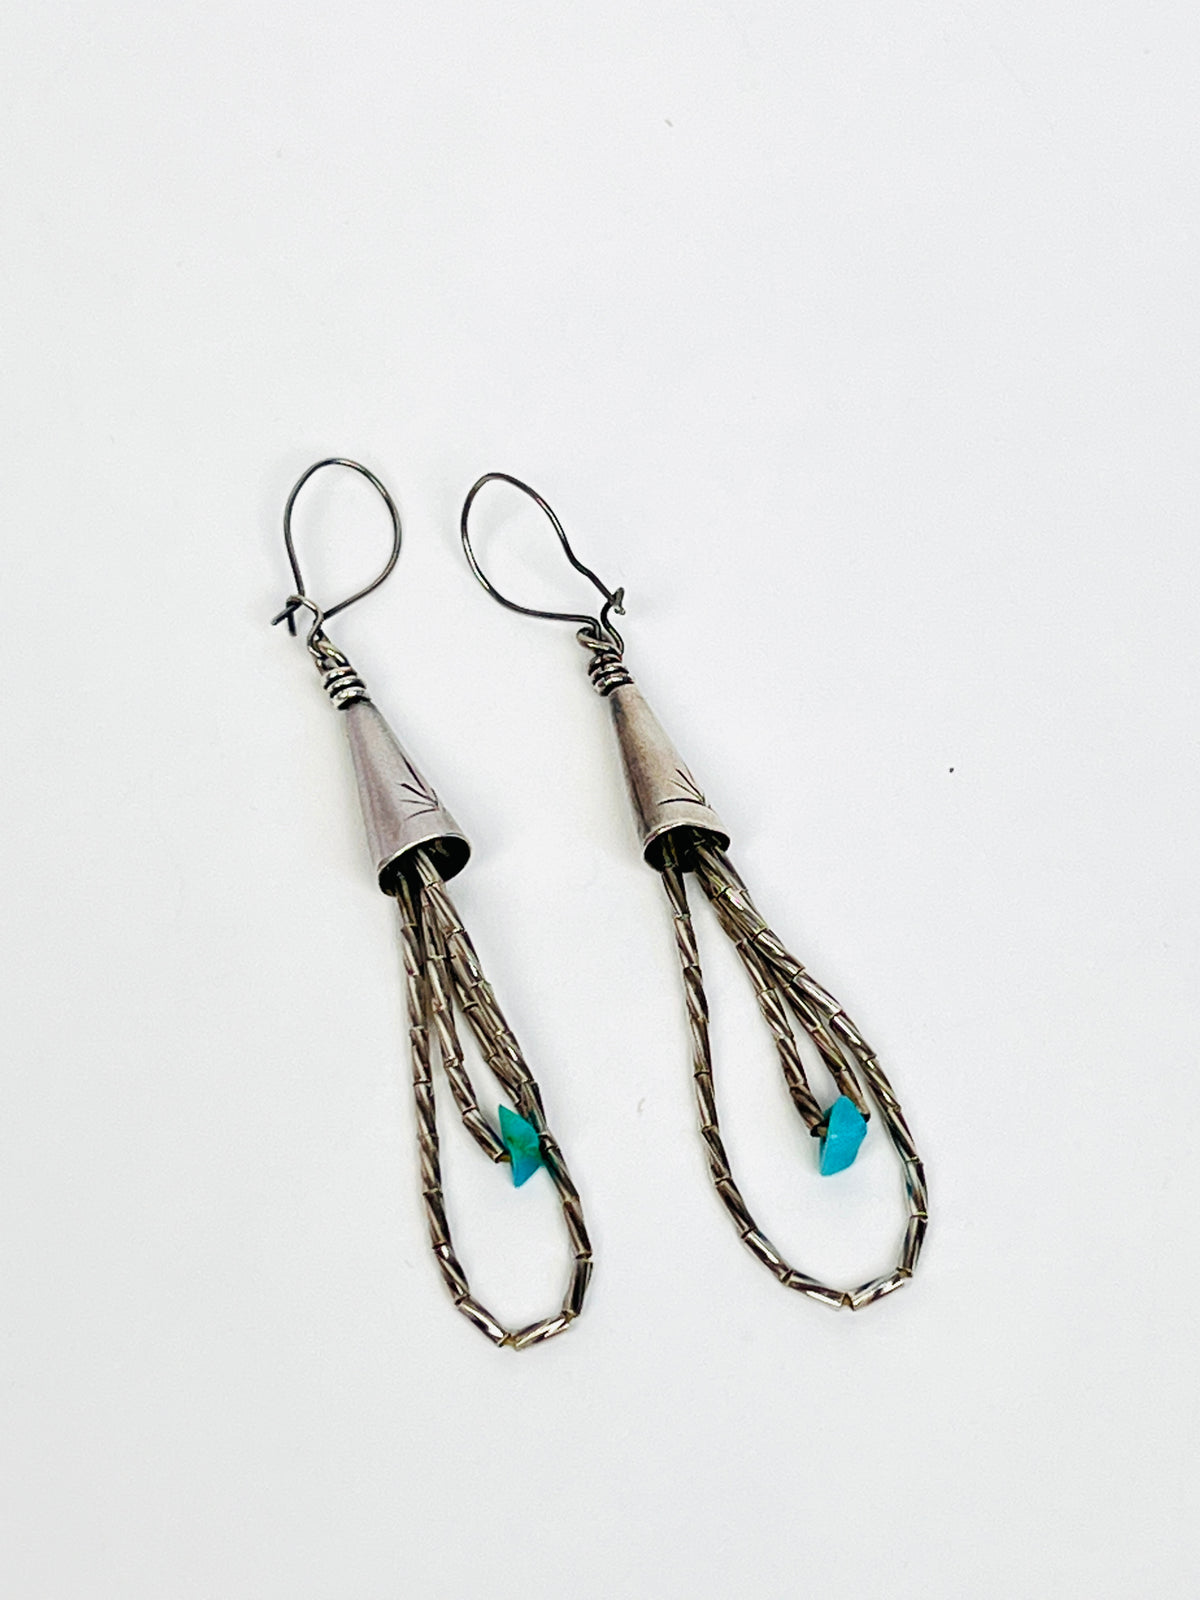 Vintage Zuni Sterling Silver and Turquoise Earrings